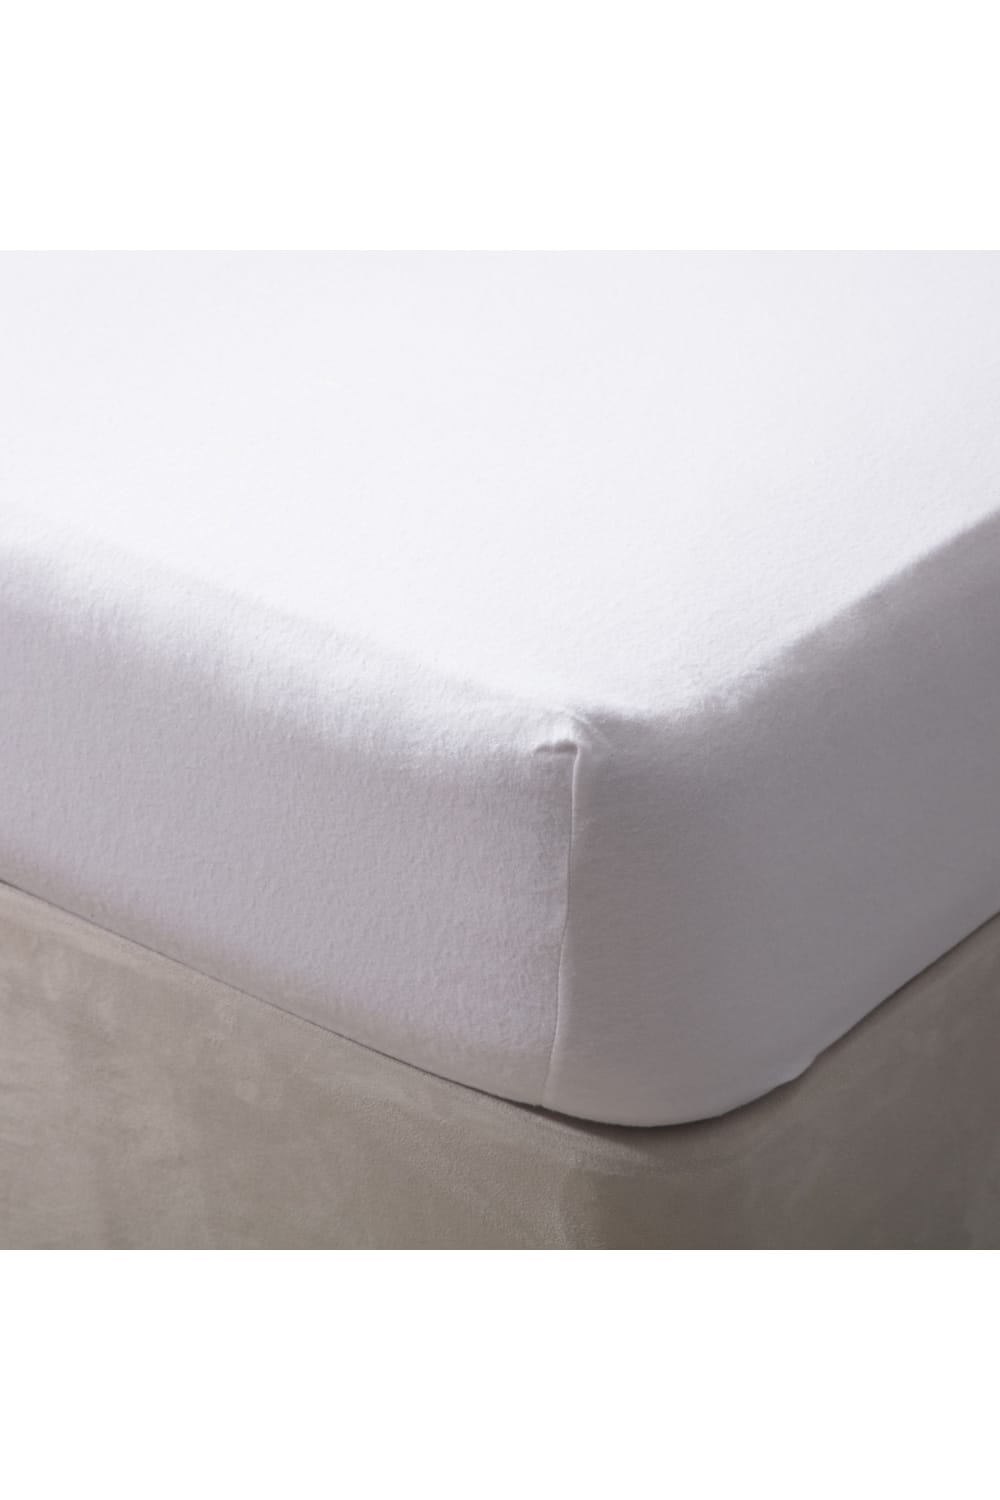 Belledorm Jersey Cotton Fitted Sheet (White) (Cot)